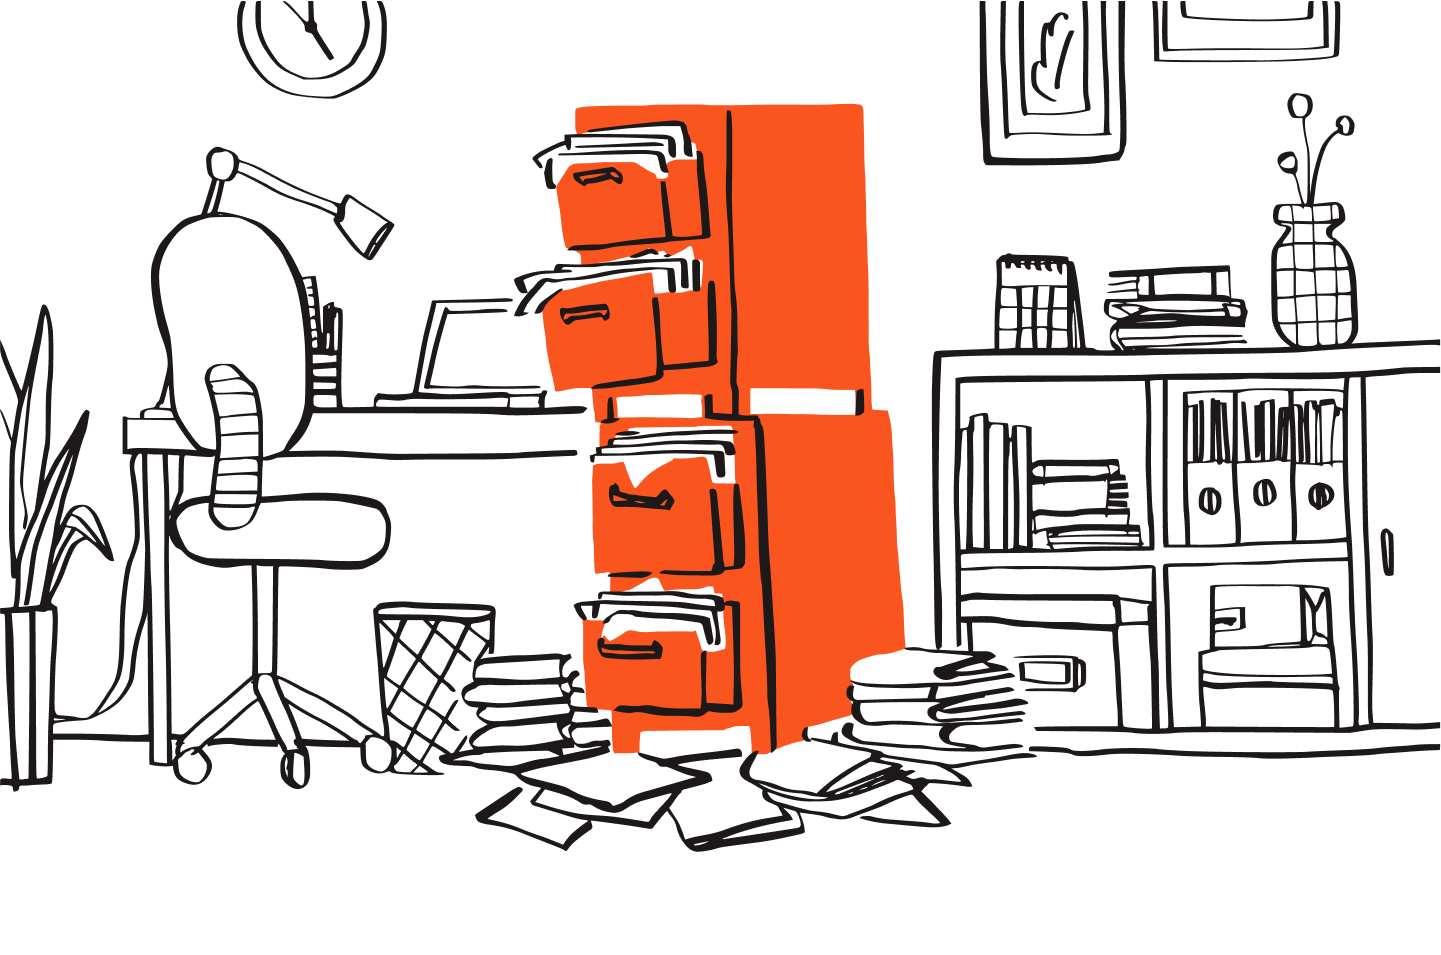 Illustration shows an overflowing filing cabinet in a home office